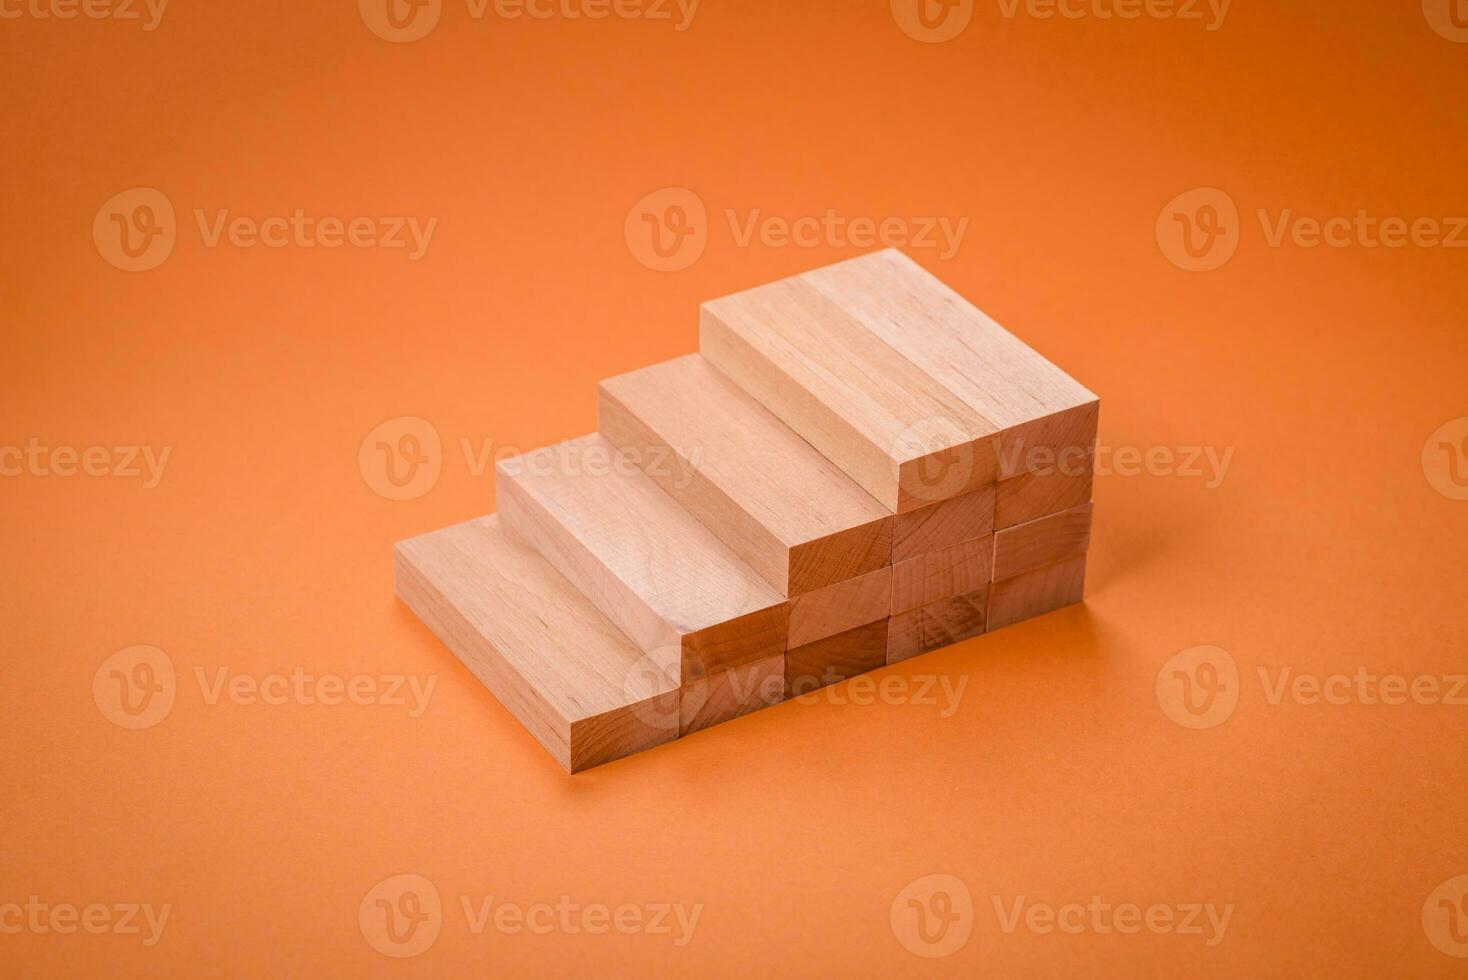 Wooden steps made of blocks as an idea of investment and profit growth in achieving a goal photo